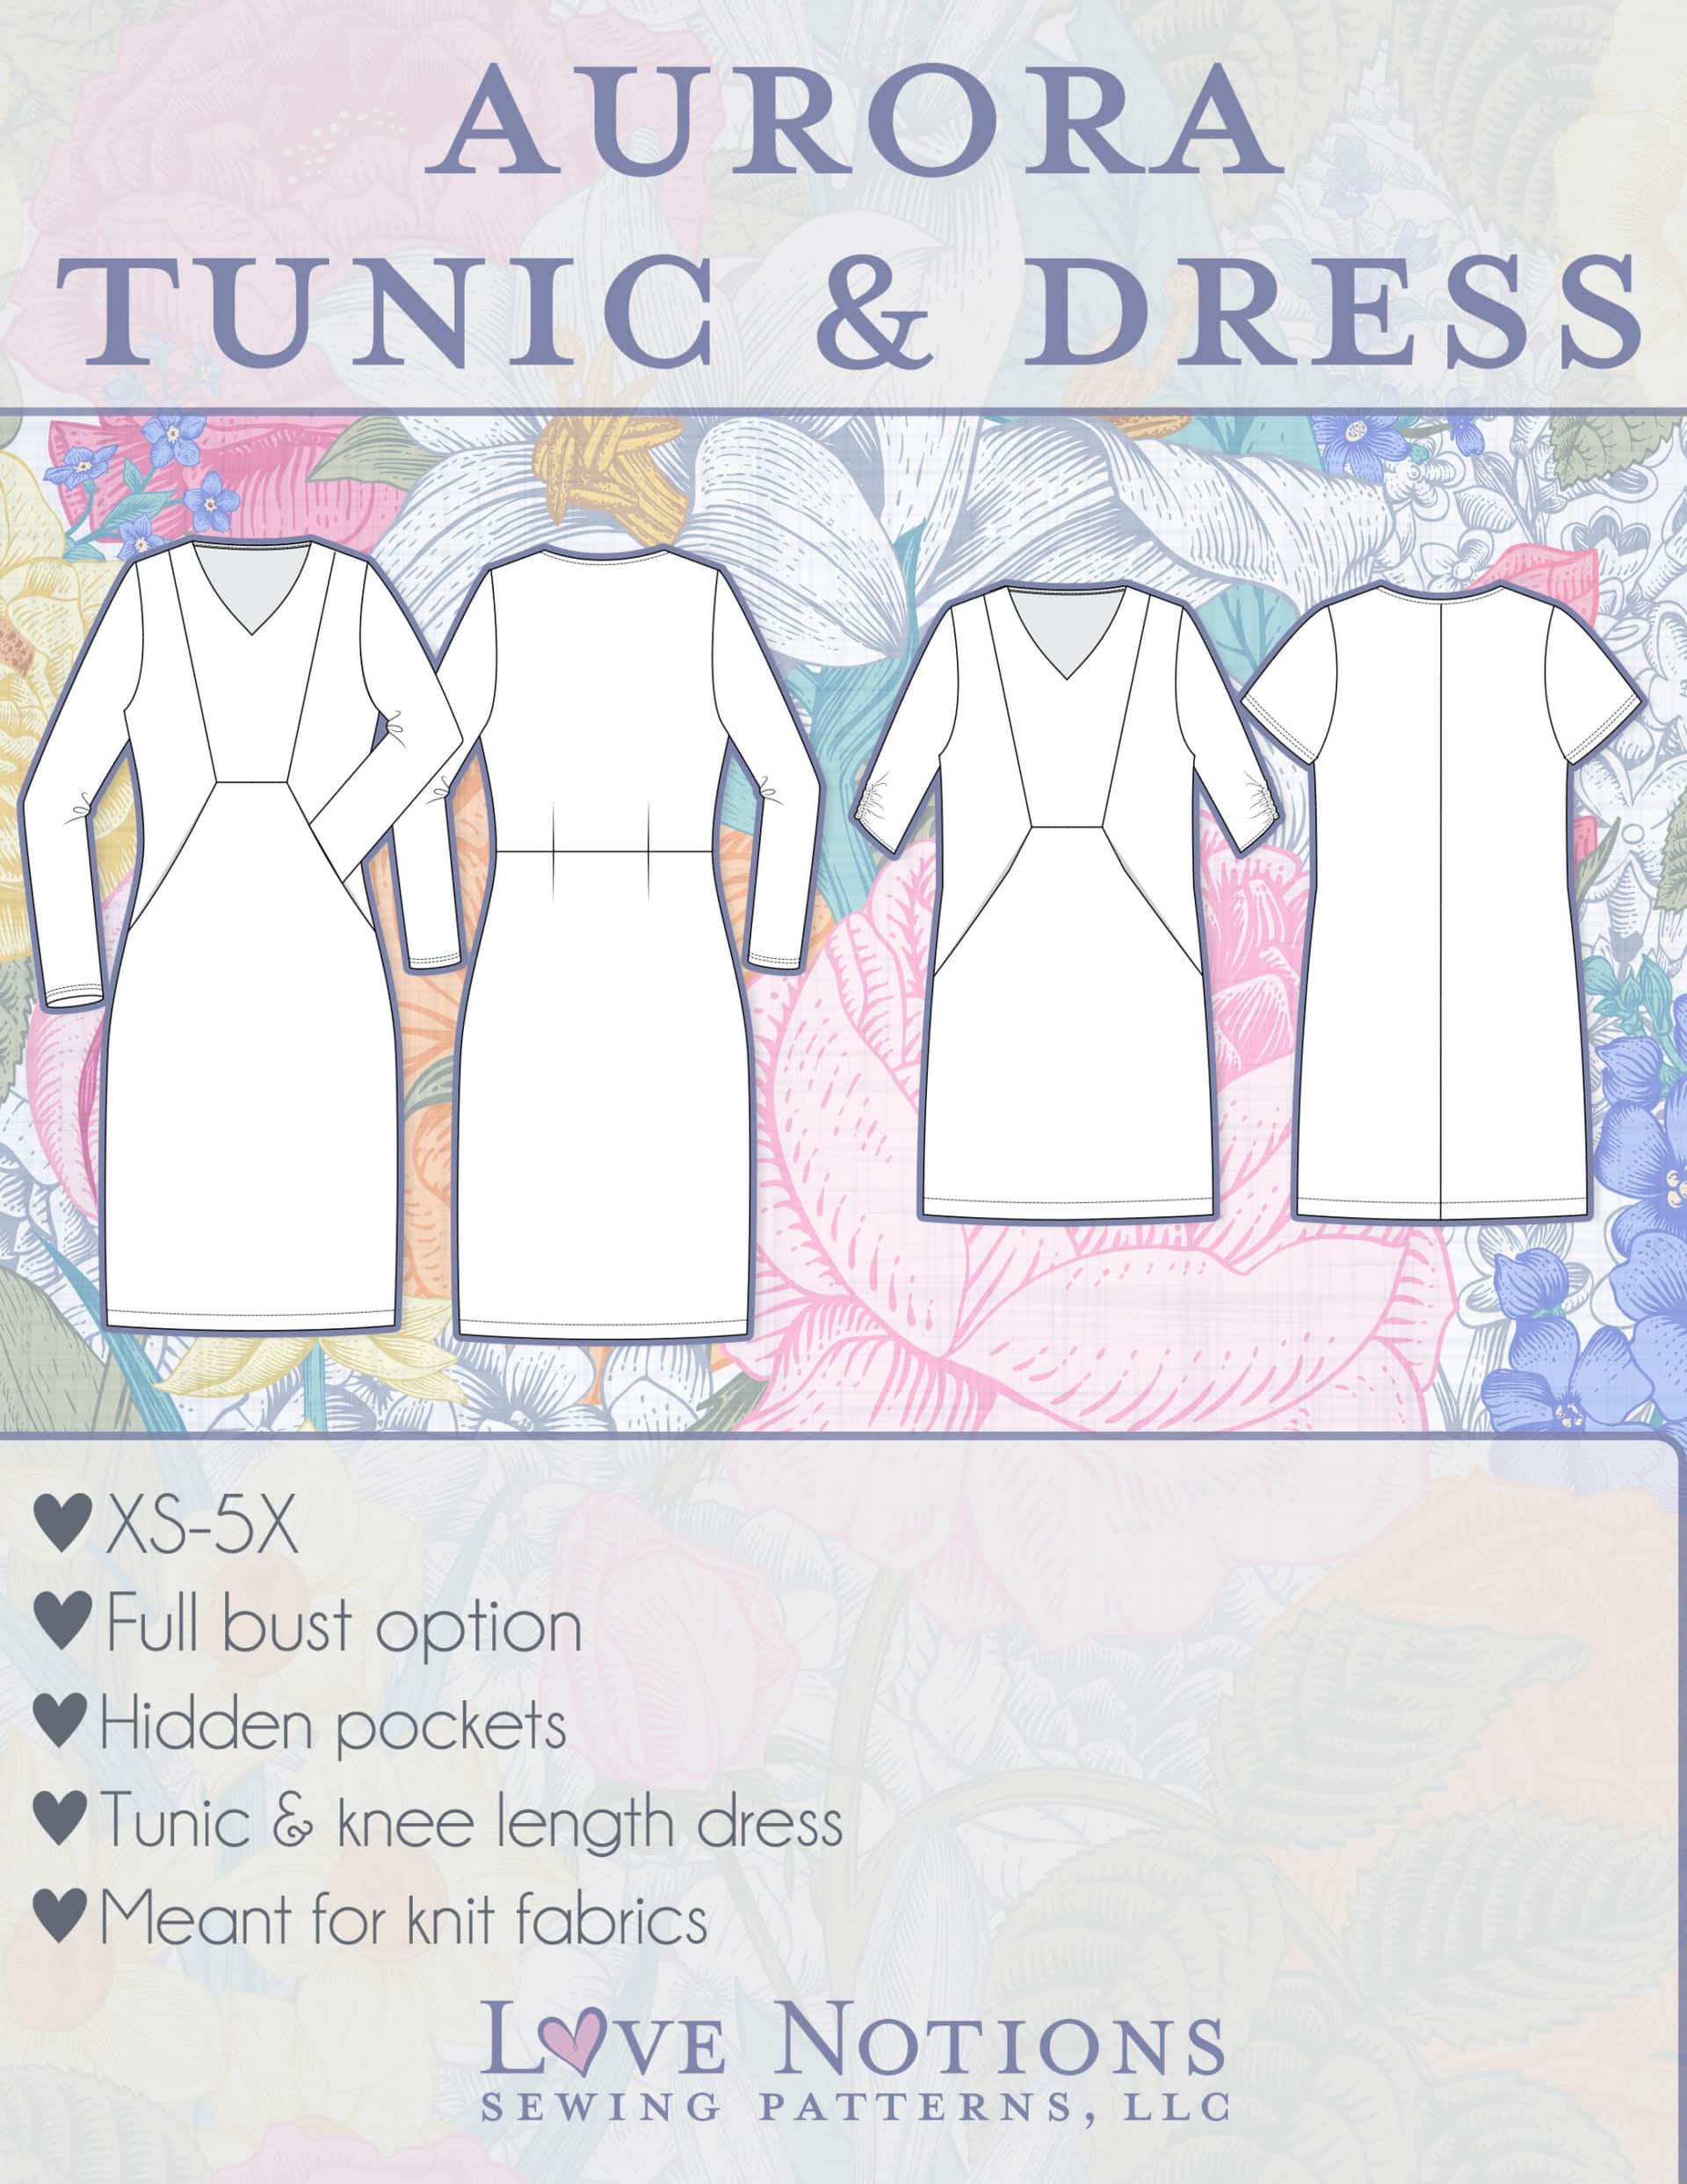 Aurora Tunic and Dress - Love Notions Sewing Patterns